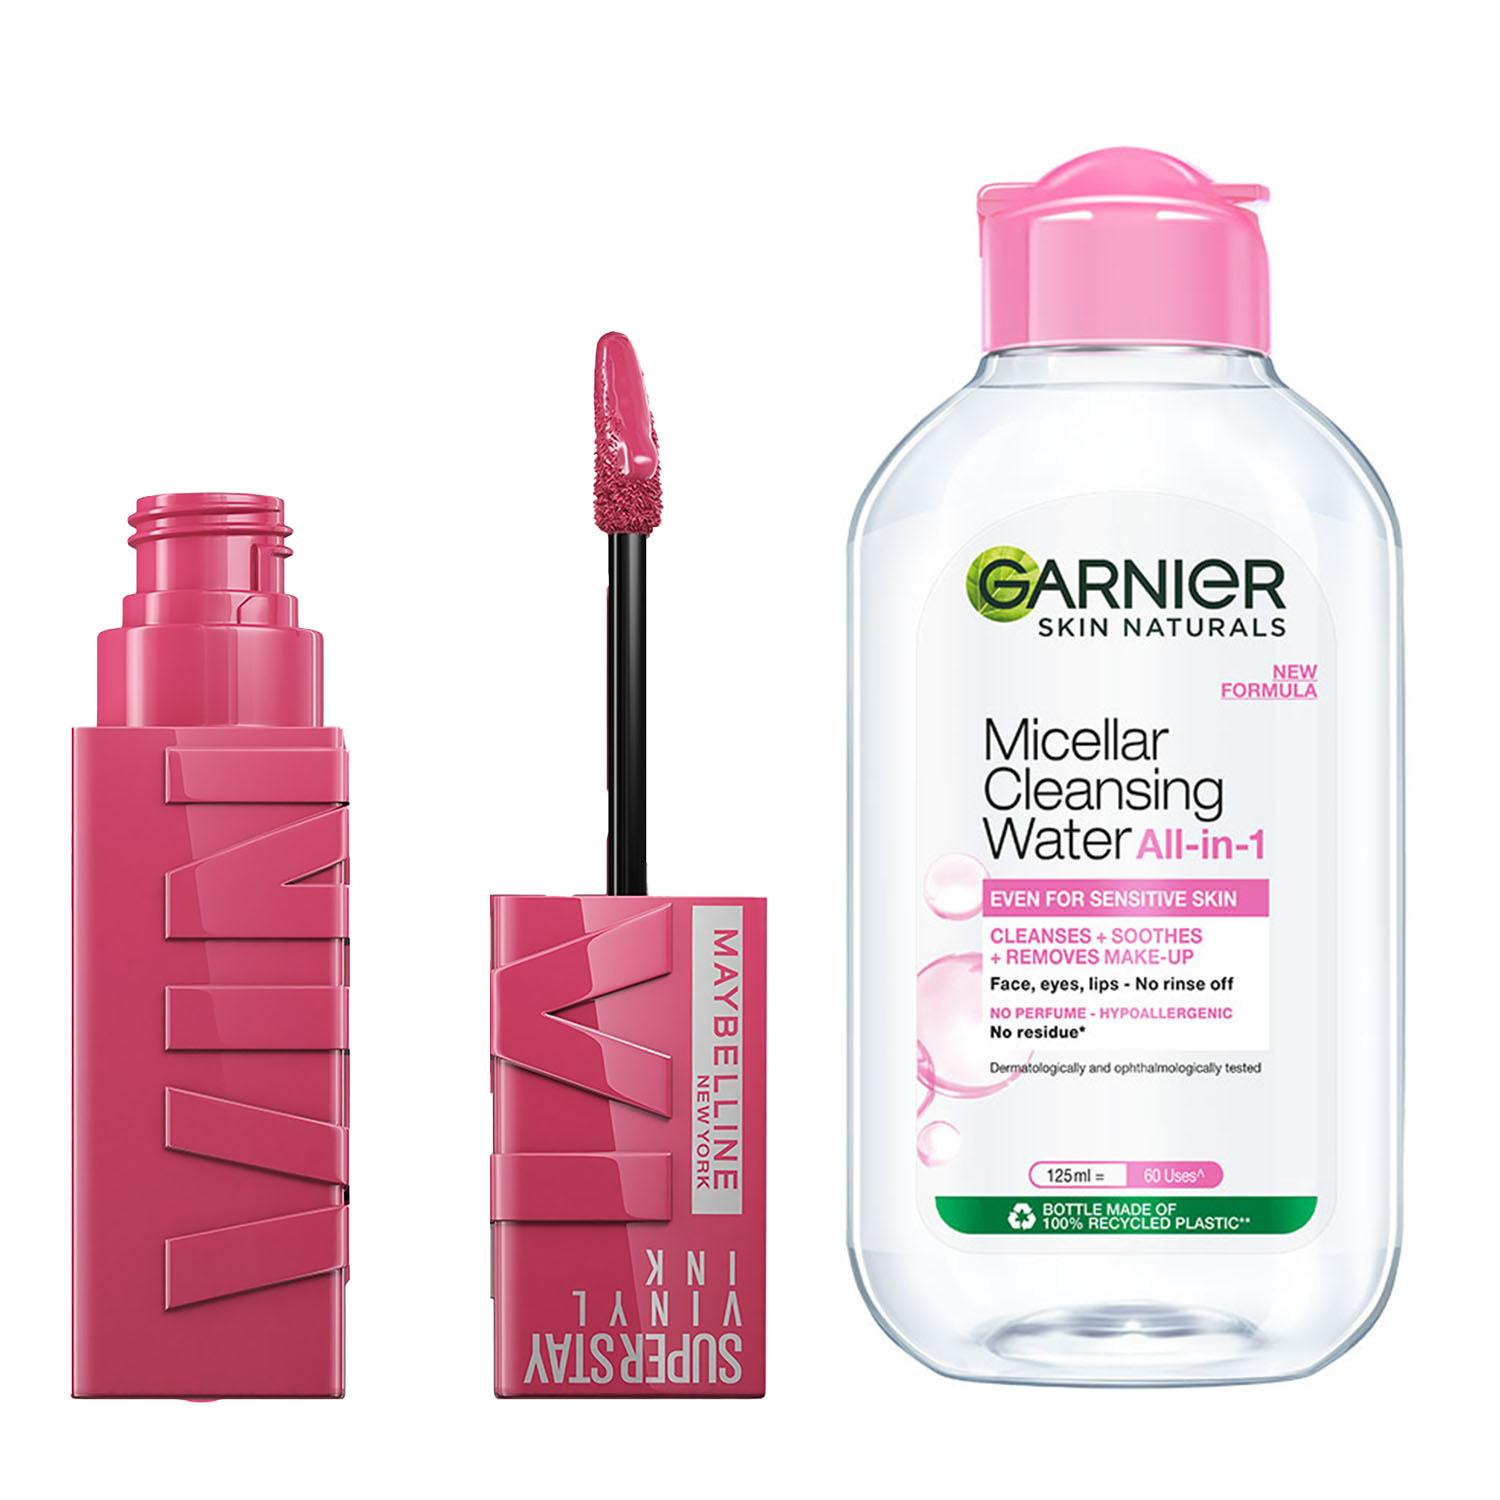 Maybelline New York | Maybelline Superstay Vinyl Ink Liquid Lipstick, Coy with Garnier Micellar Cleansing Water Combo